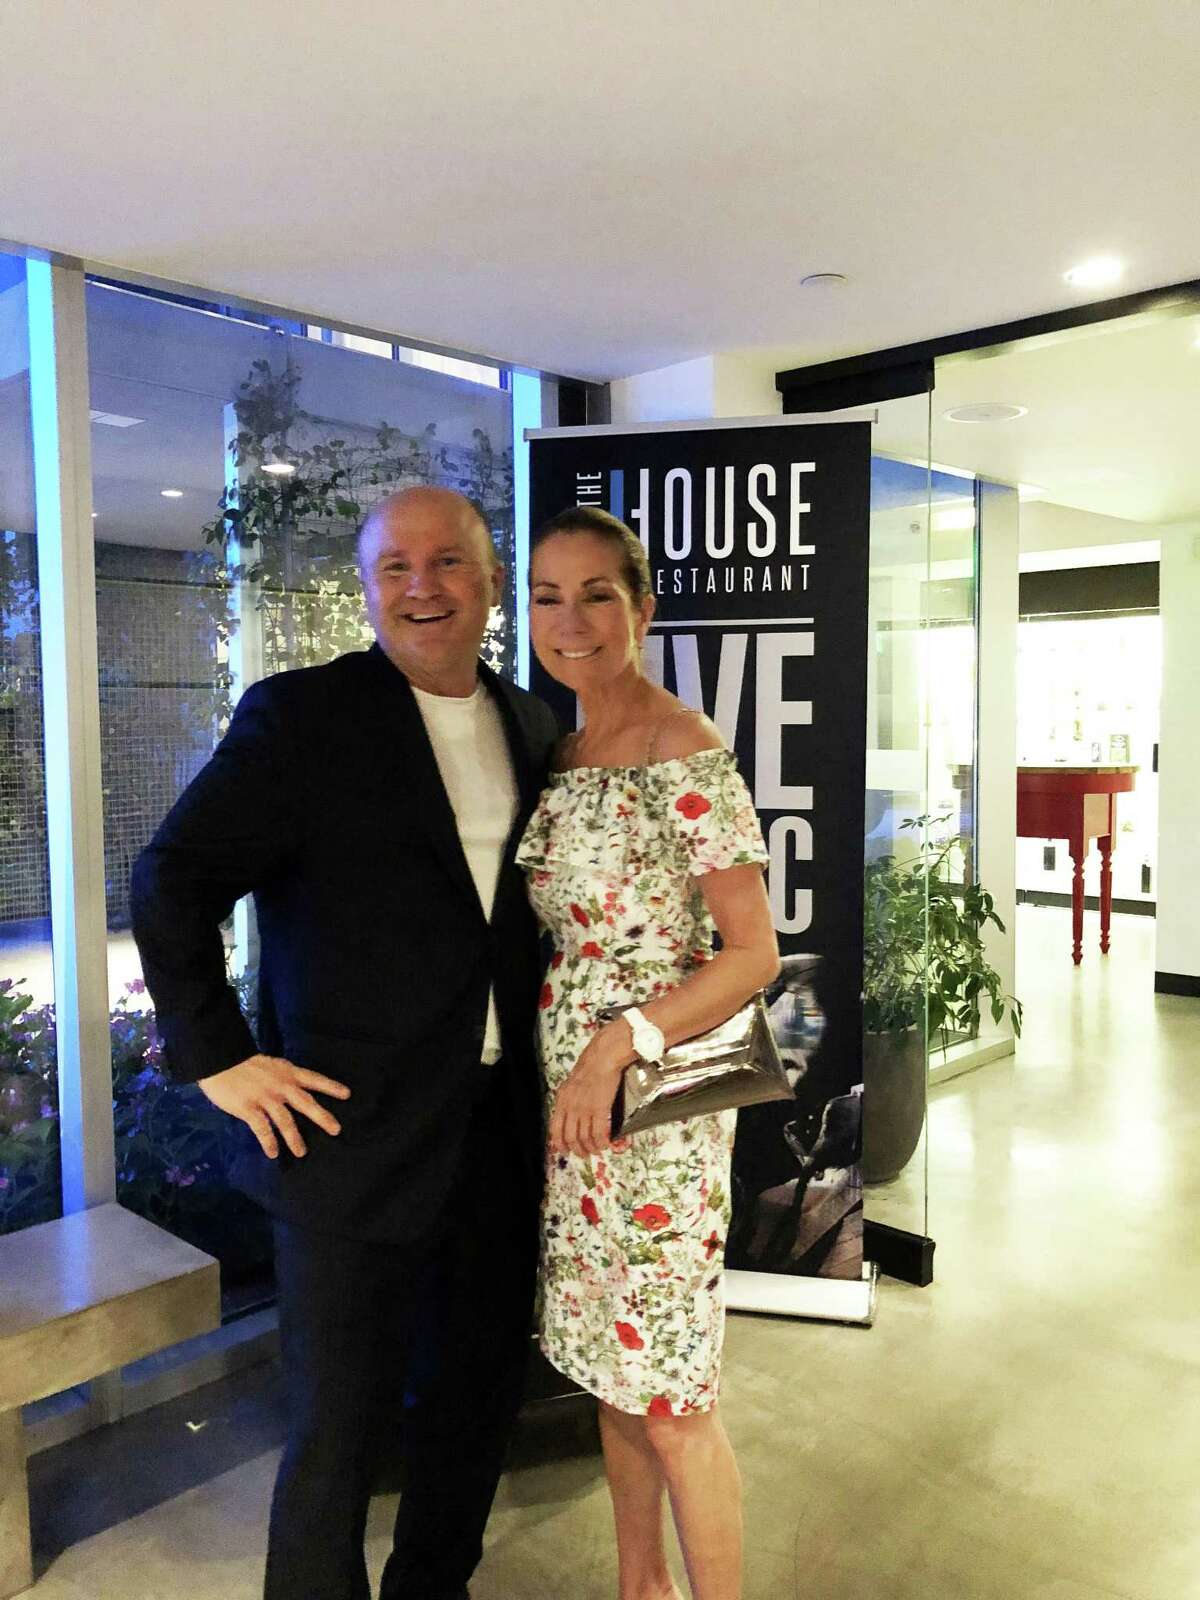 Tony Capasso, food and beverage manager of the JHouse in Riverside, poses with ‘Today’ show co-host Kathie Lee Gifford at the JHouse last weekend.